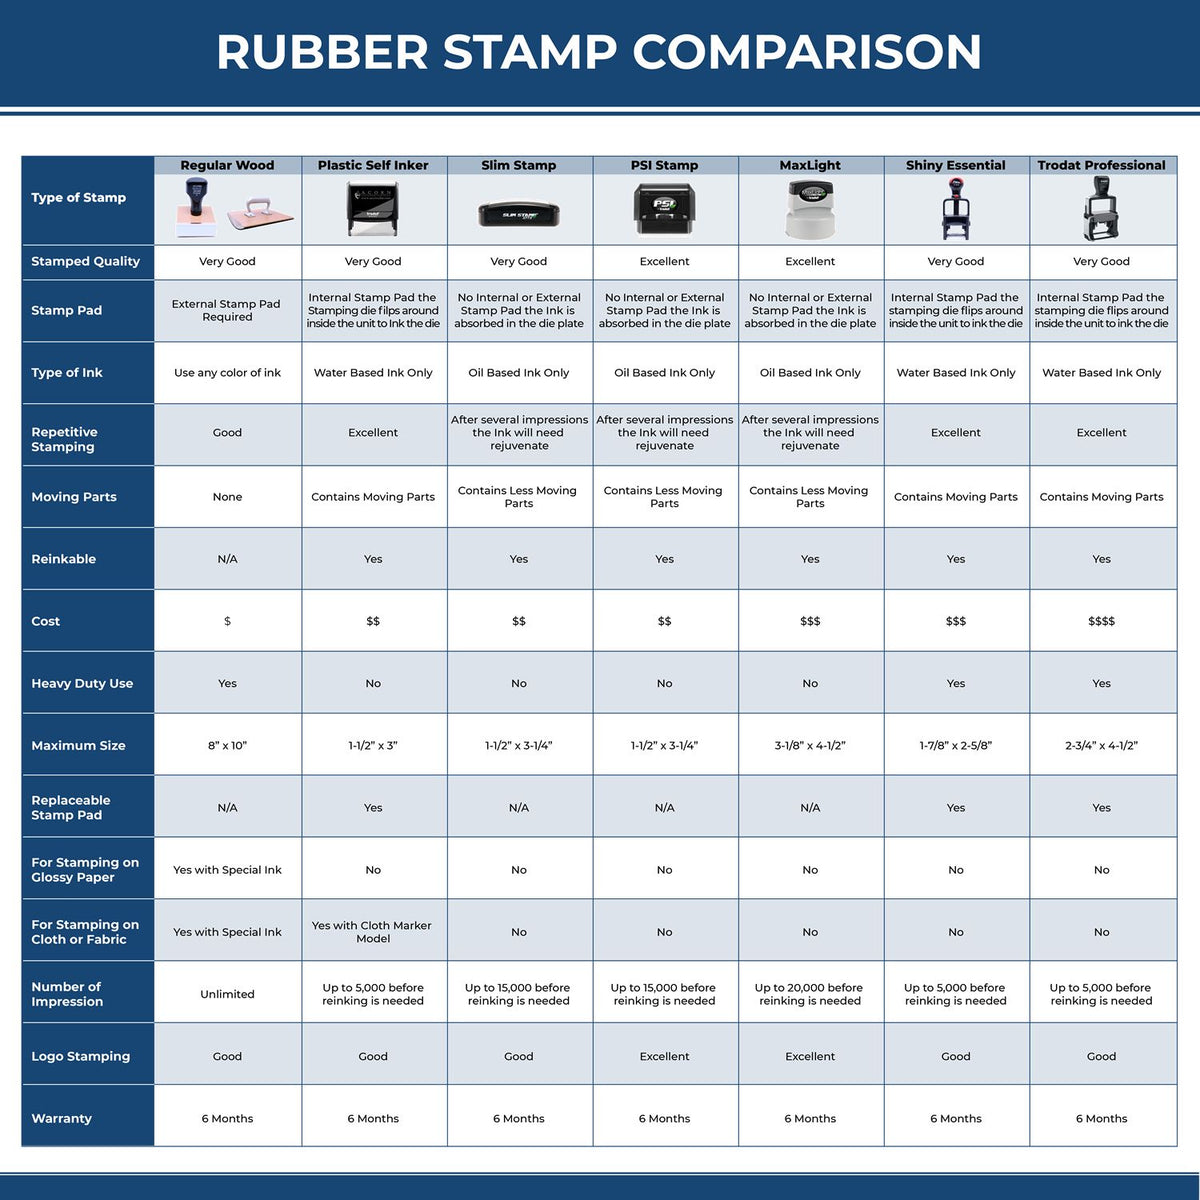 Large Sign Date Rubber Stamp 4632R Rubber Stamp Comparison